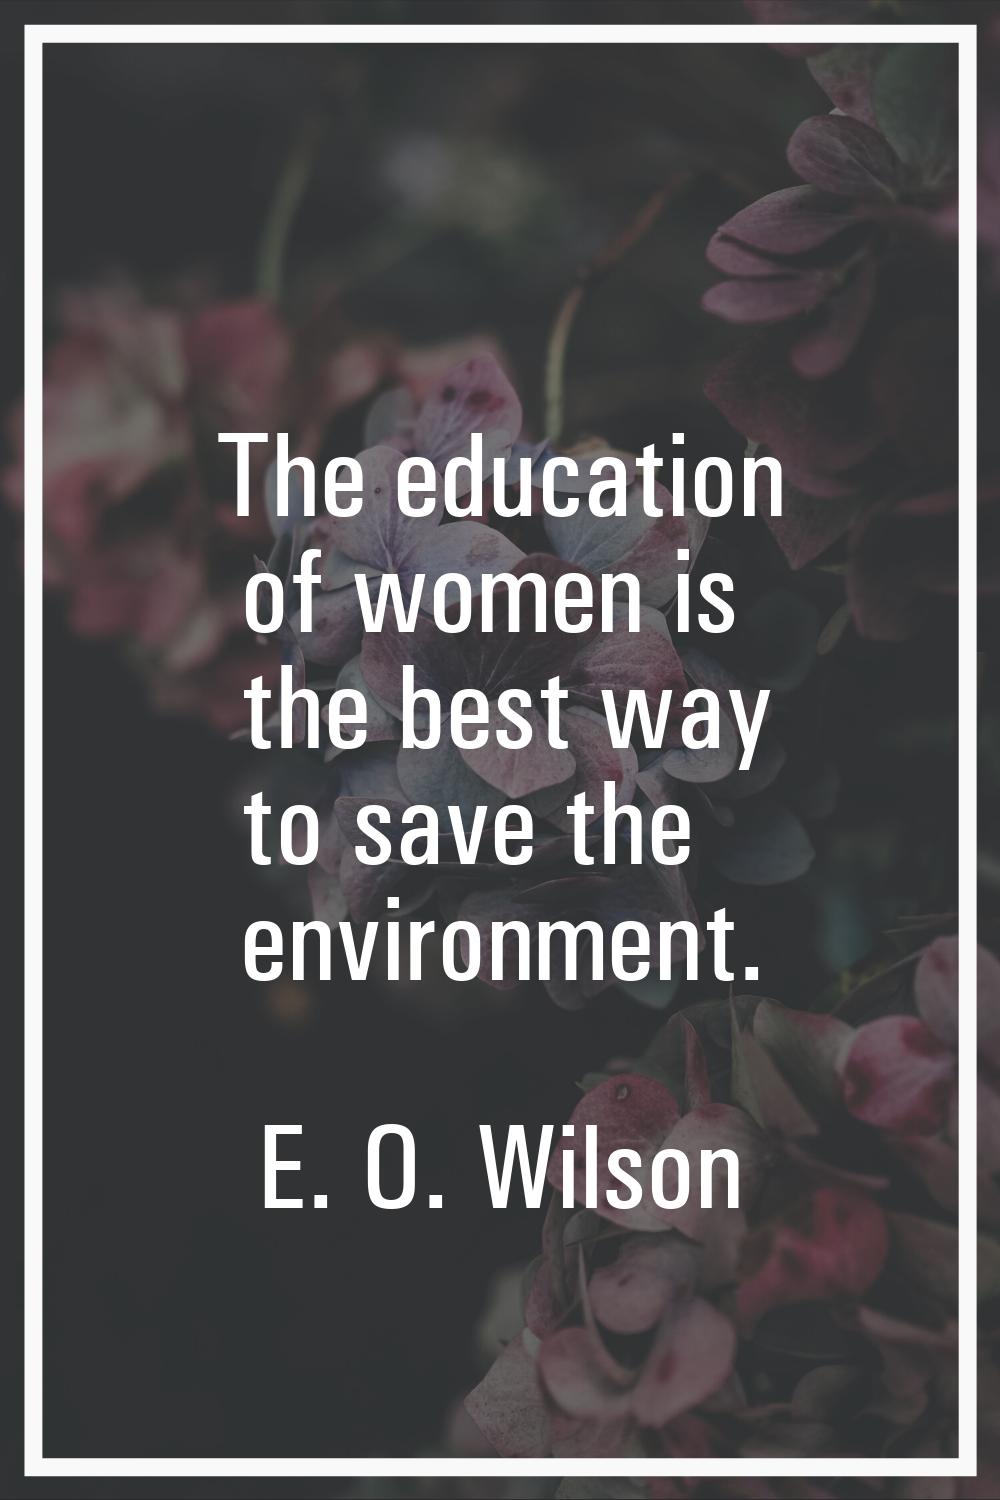 The education of women is the best way to save the environment.